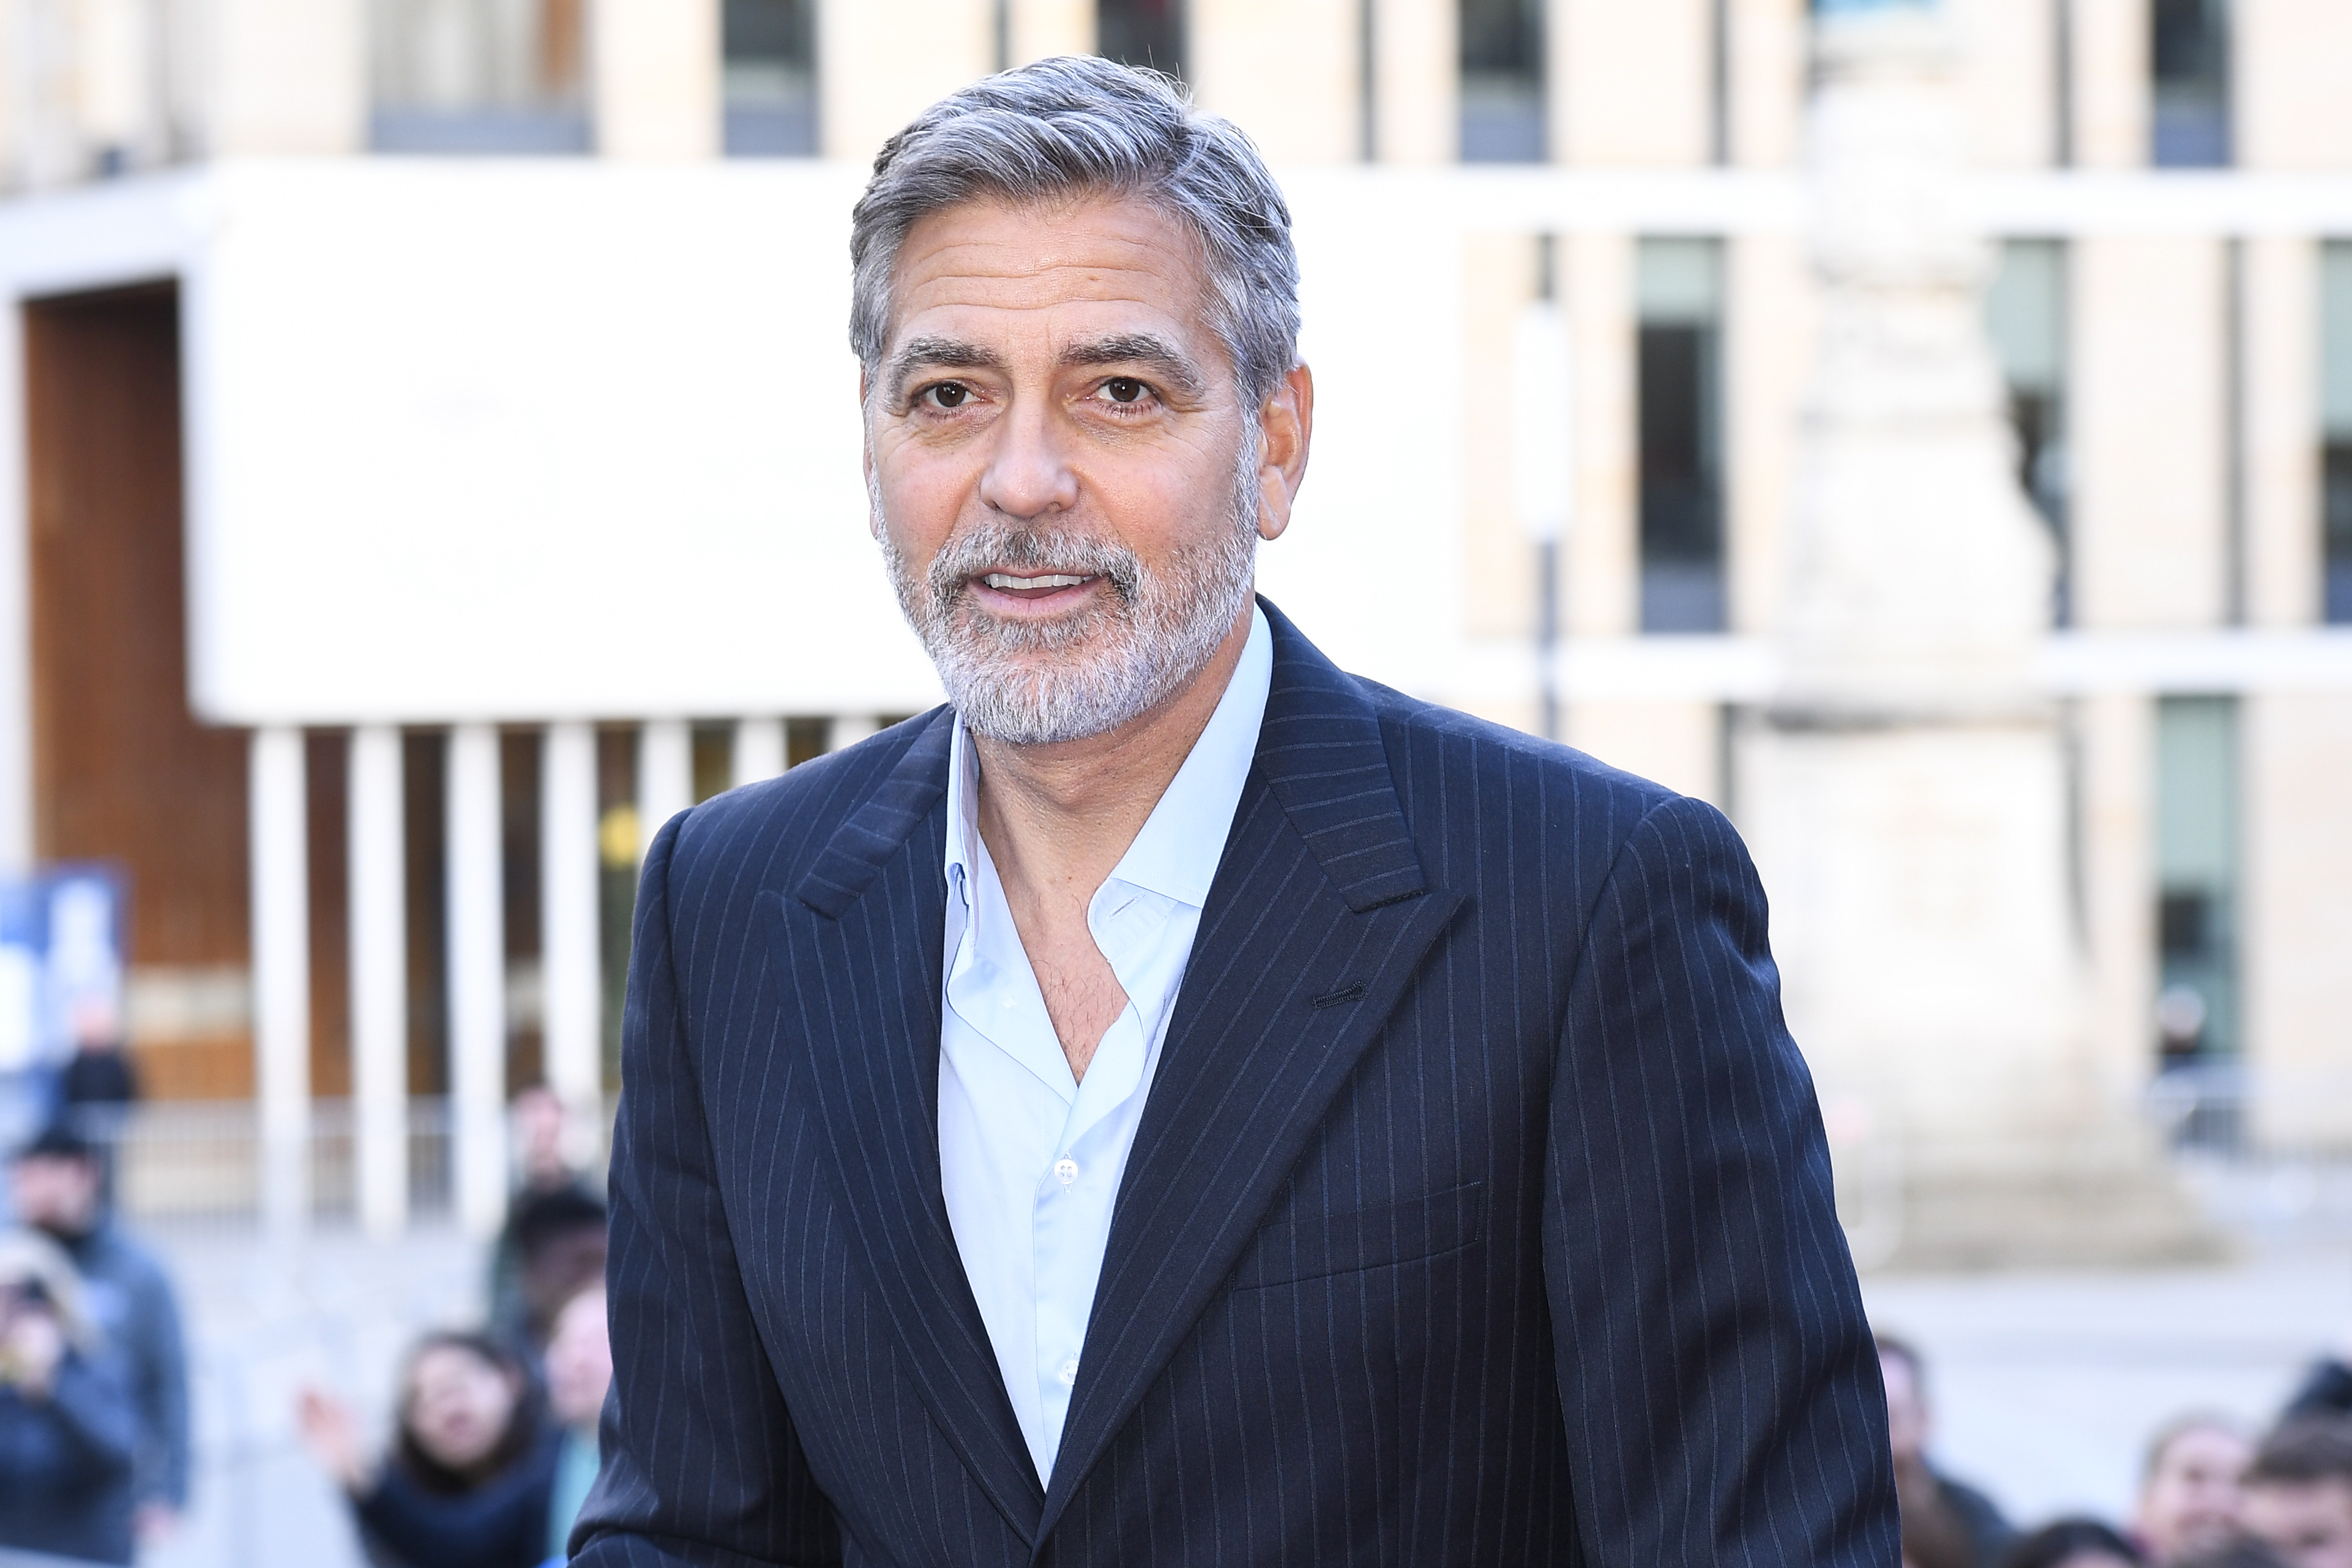 George and Amal Clooney attend postcode lottery gala in Edinburgh